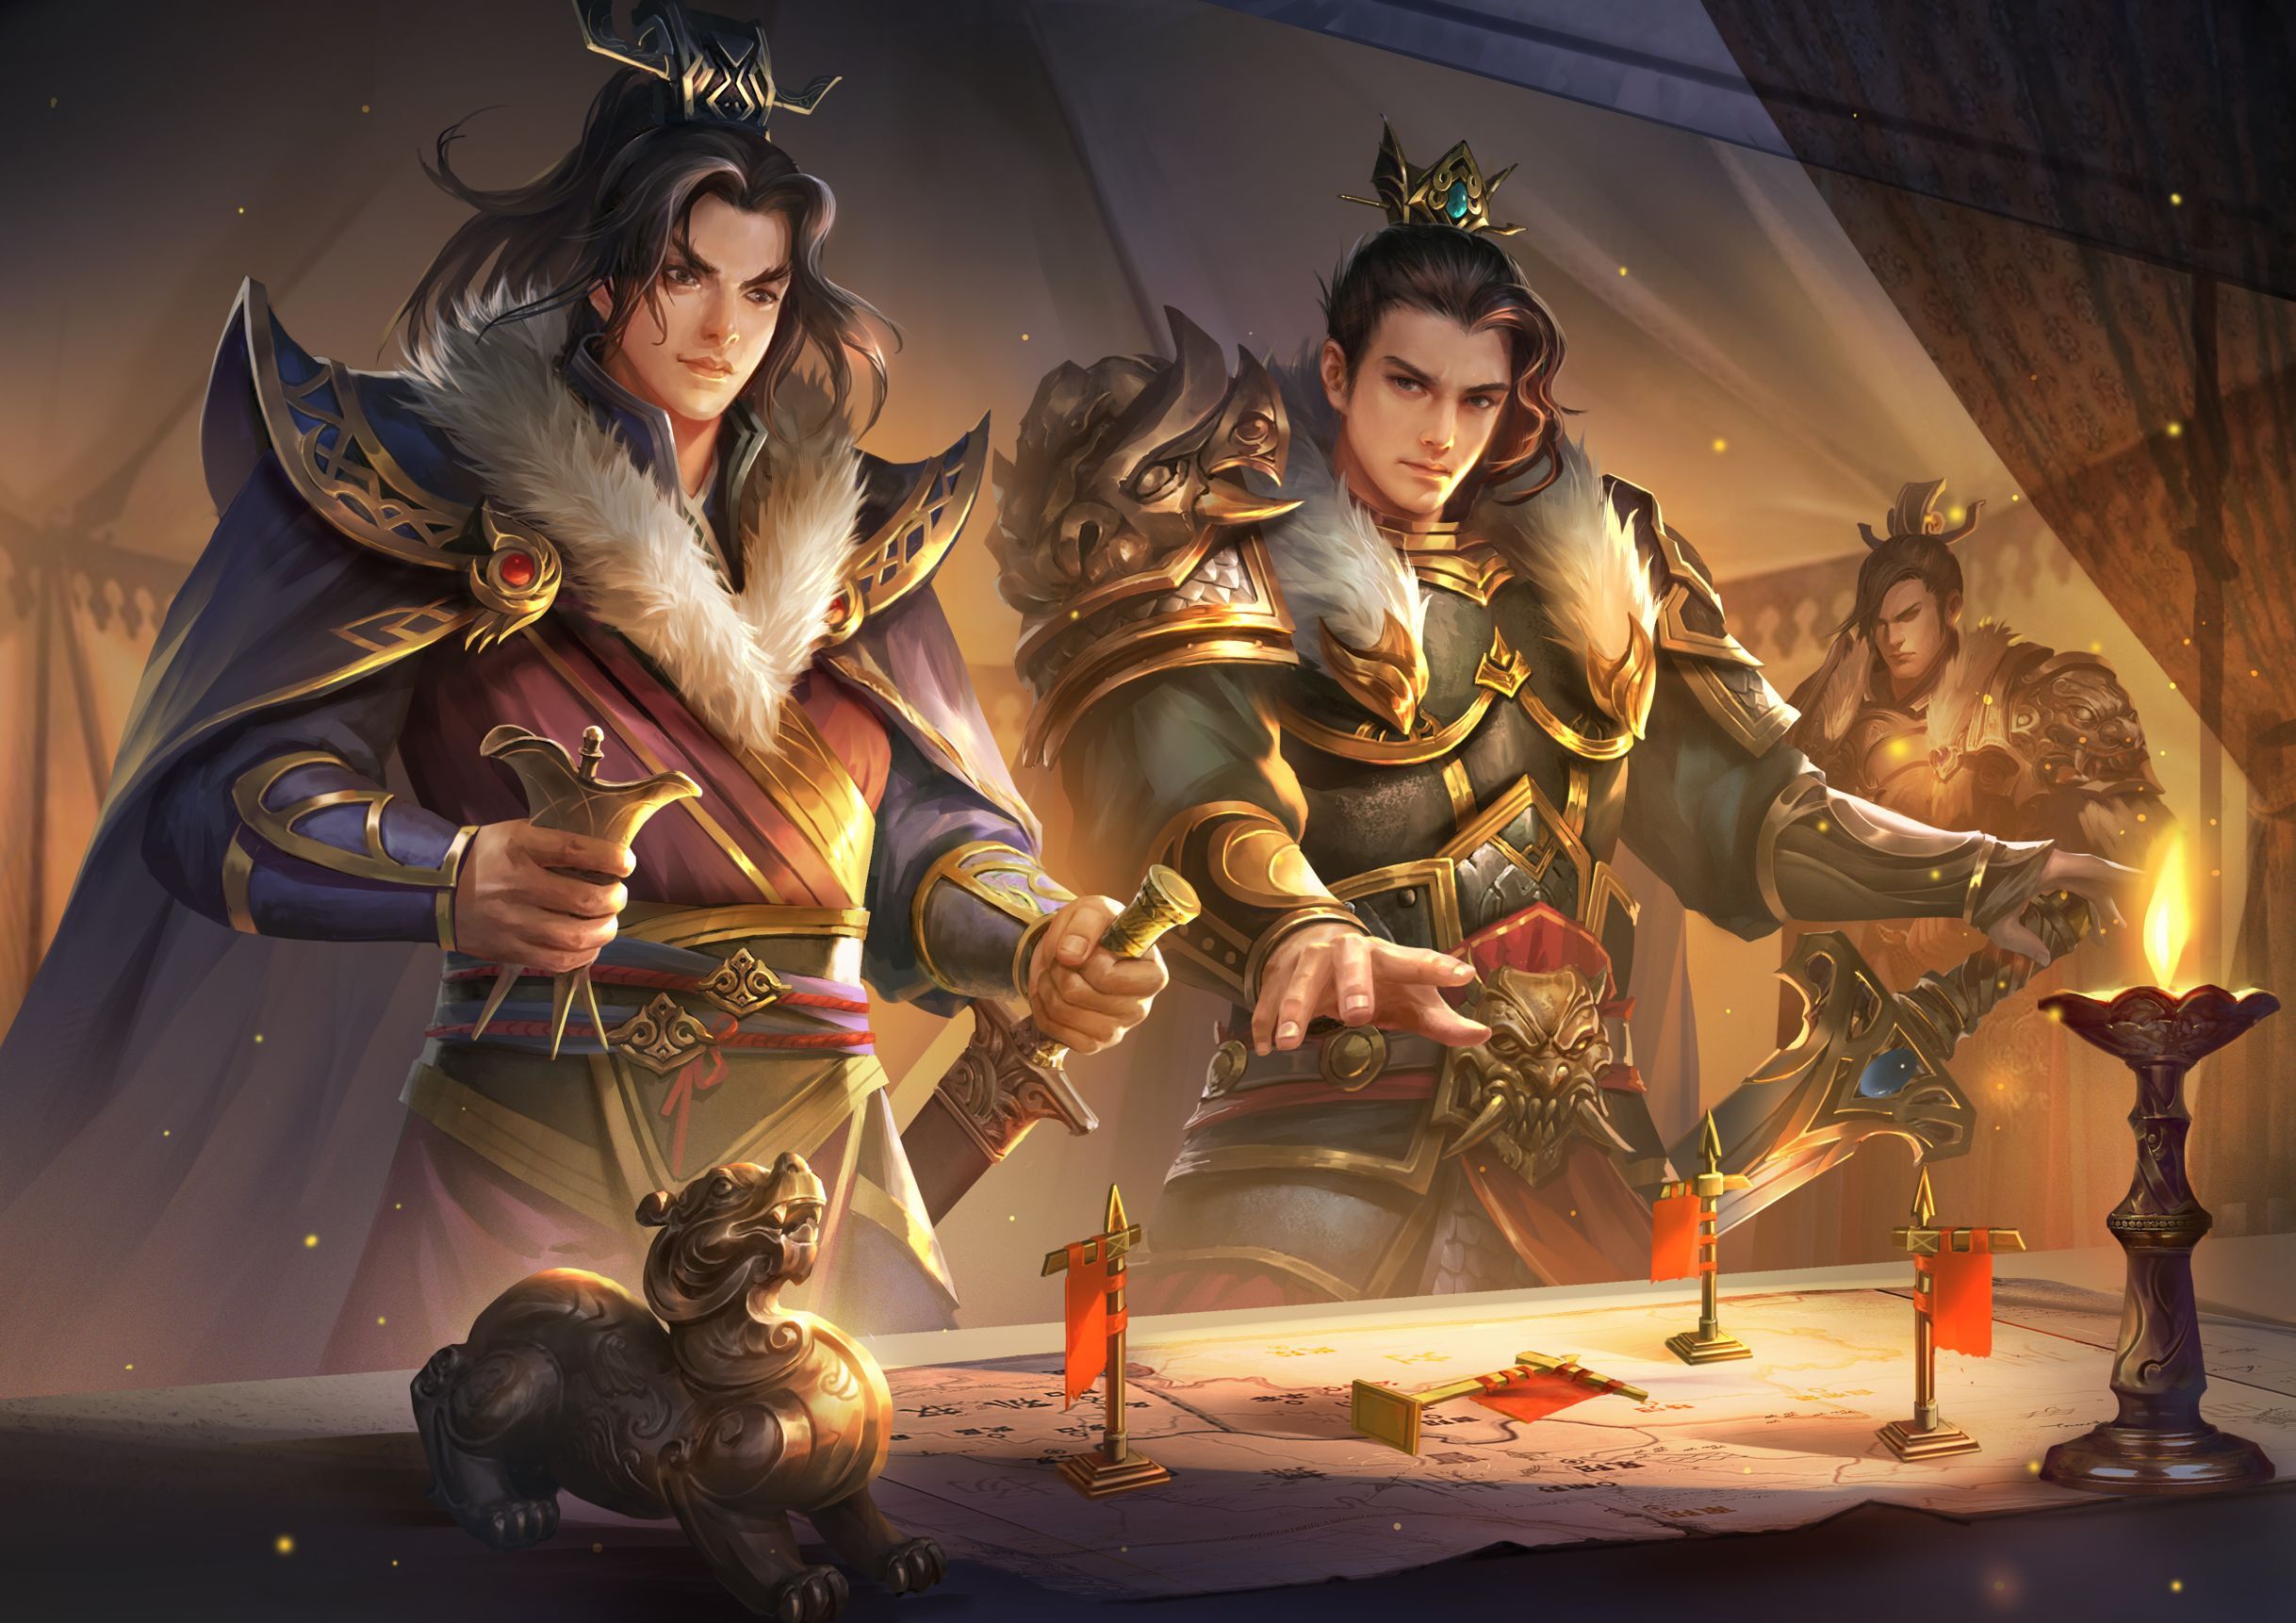 Video Game Characters Three Kingdoms Video Games Video Game Art Video Game Man Armor Candles Sword W 2436x1722